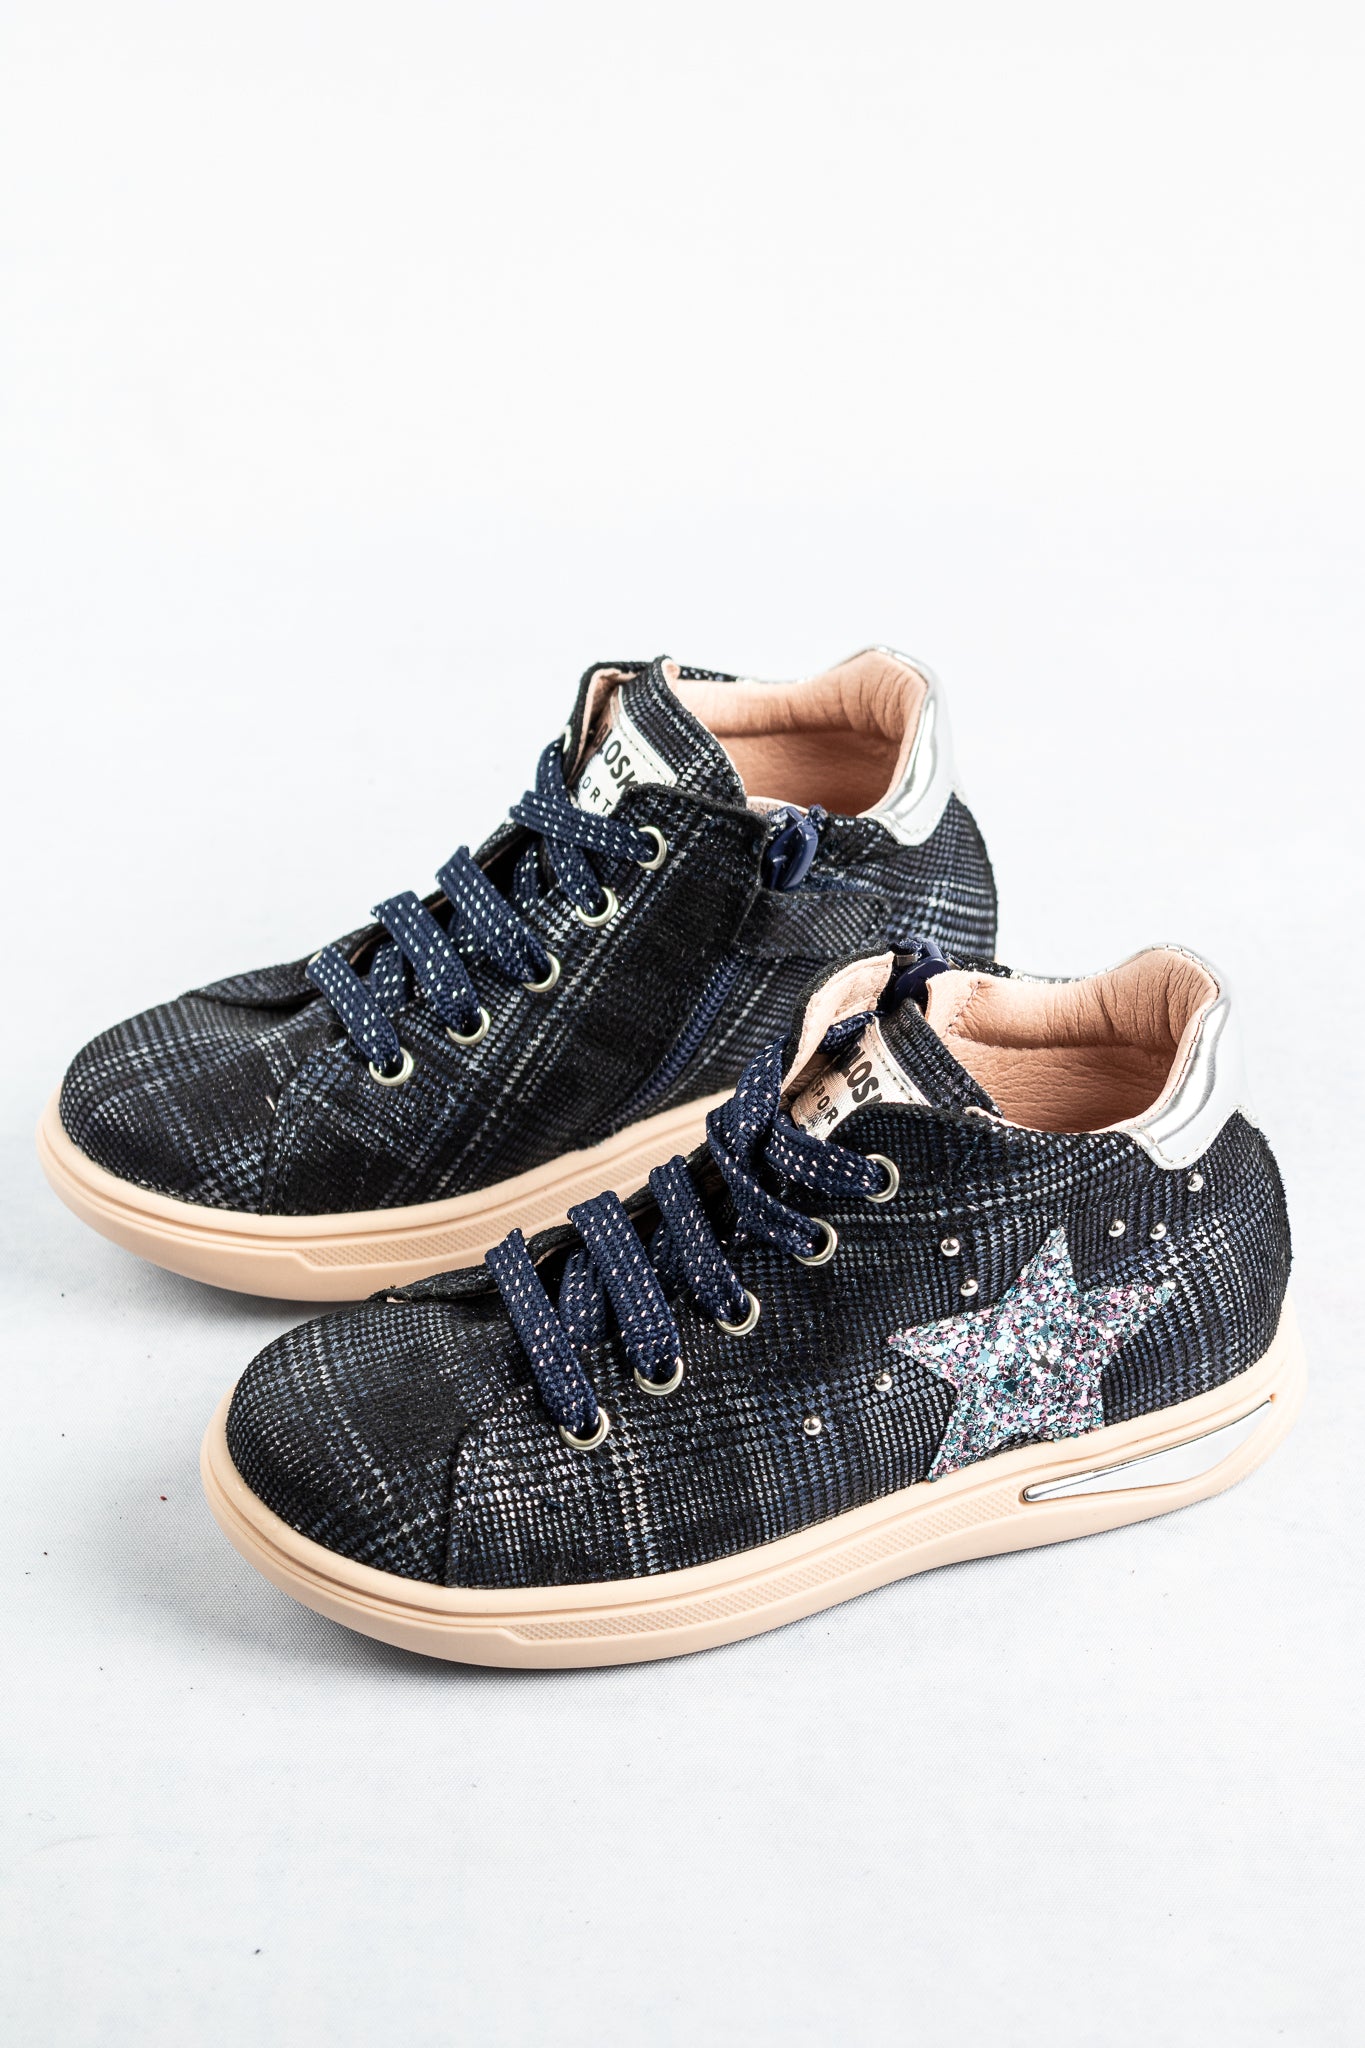 490440 Pablosky Navy Glitter Boots for sale online ireland